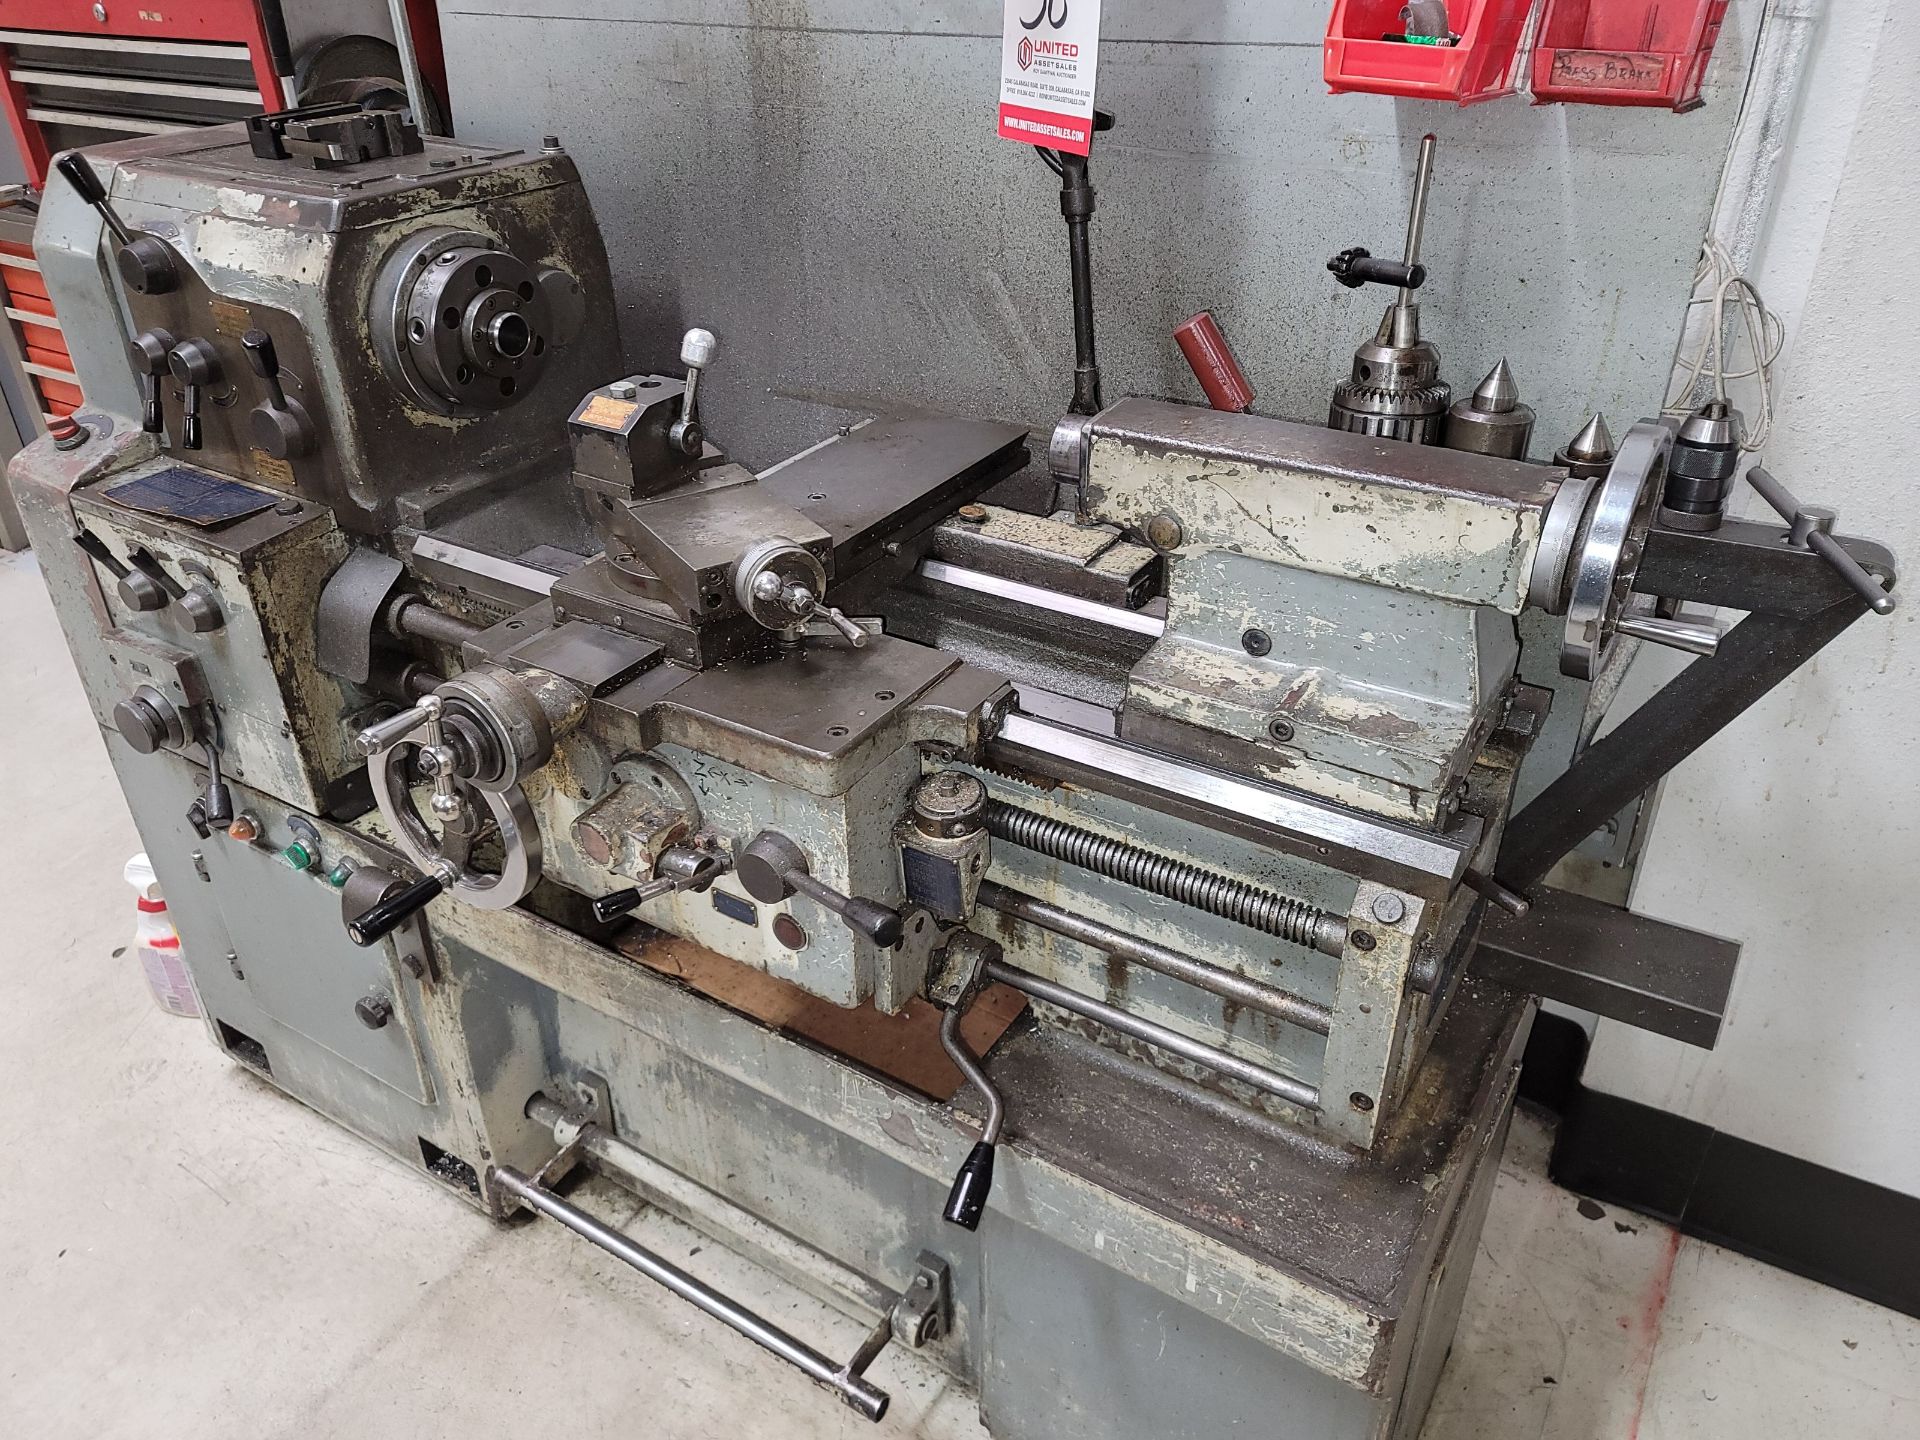 CADILLAC 1422 GAP BED ENGINE LATHE, TOOL POST, TAILSTOCK, STEADY REST, 5C COLLET CHUCK, PLUS 8" - Image 2 of 6